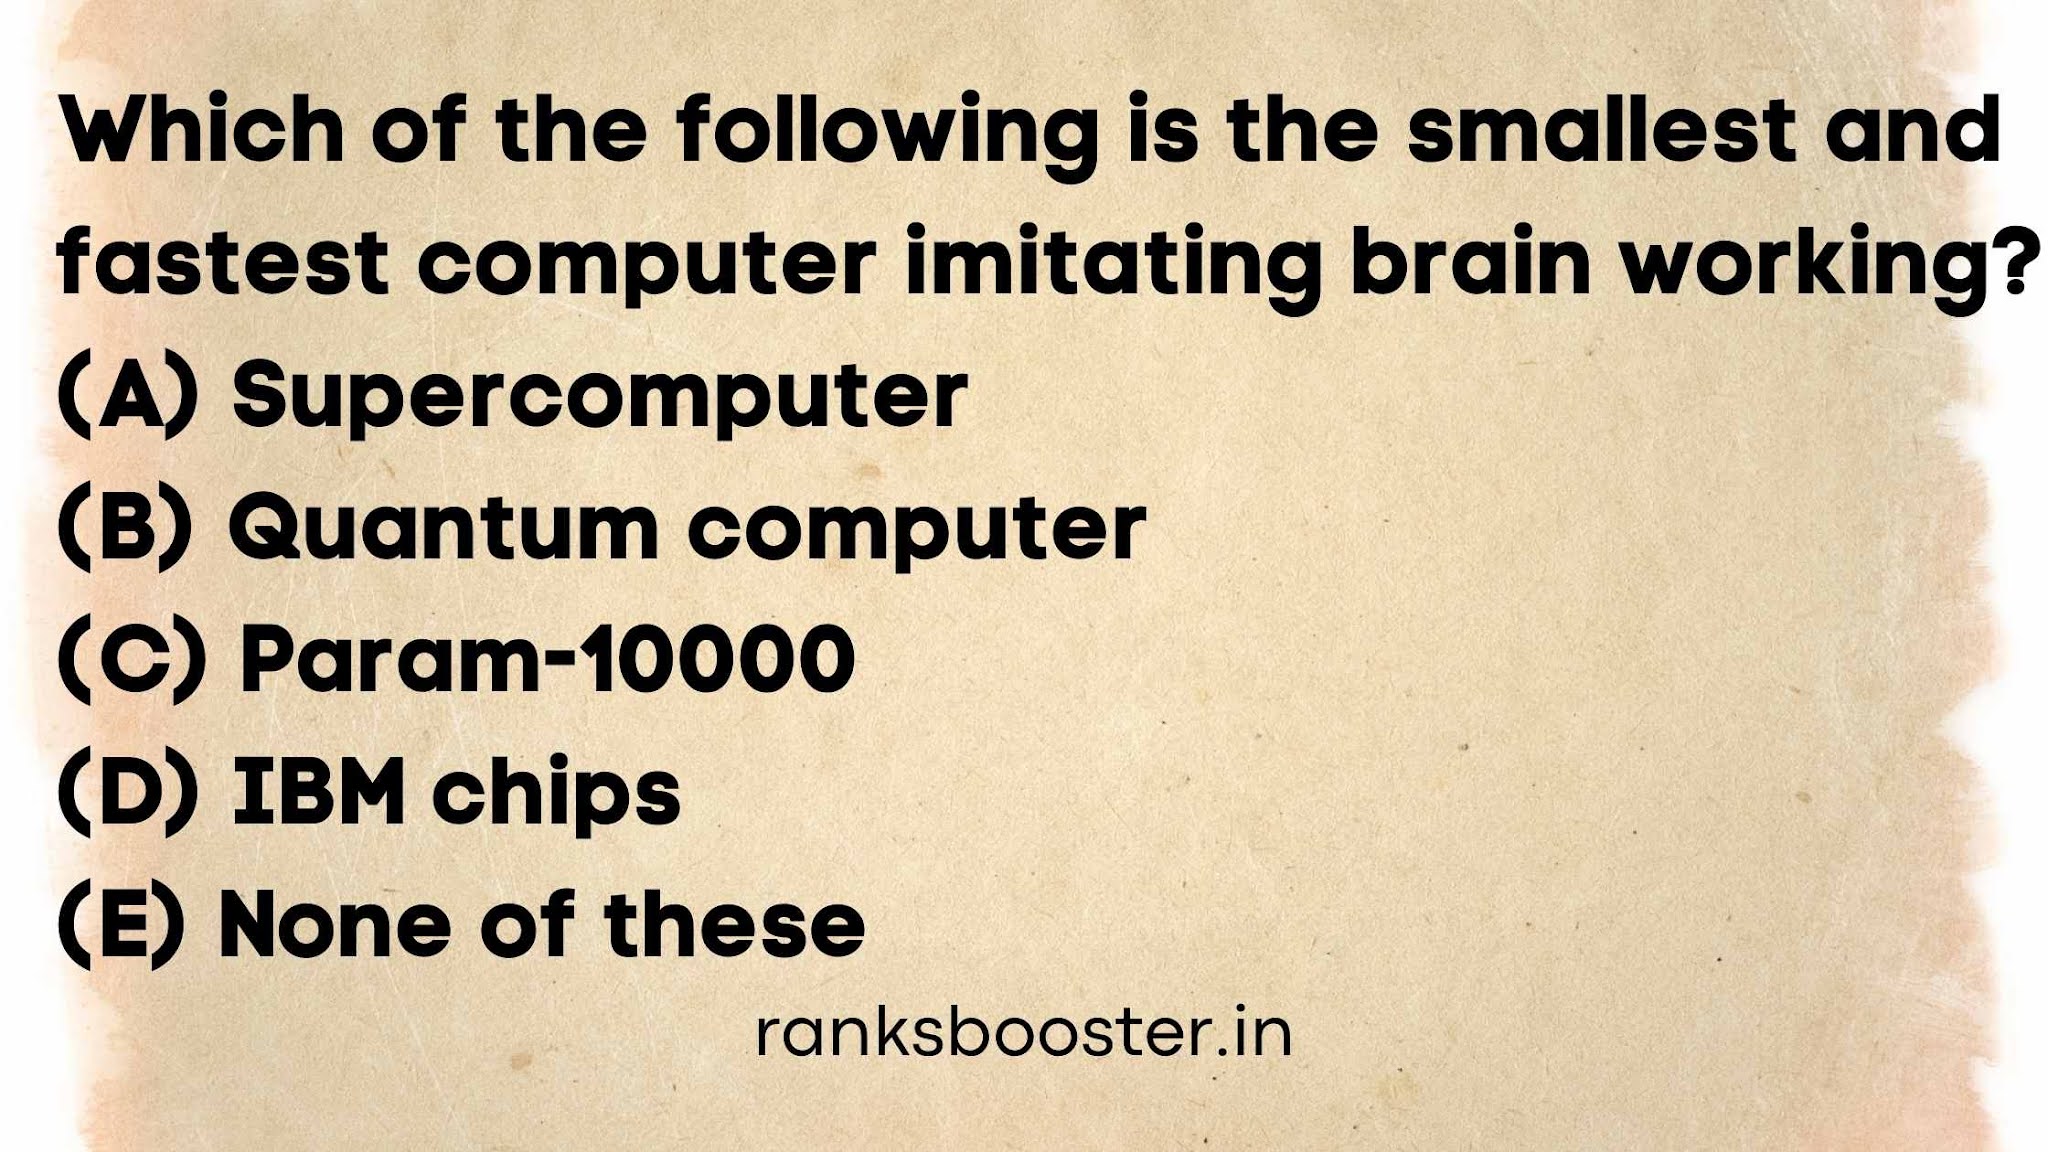 Which of the following is the smallest and fastest computer imitating brain working? (A) Supercomputer (B) Quantum computer (C) Param-10000 (D) IBM chips (E) None of these